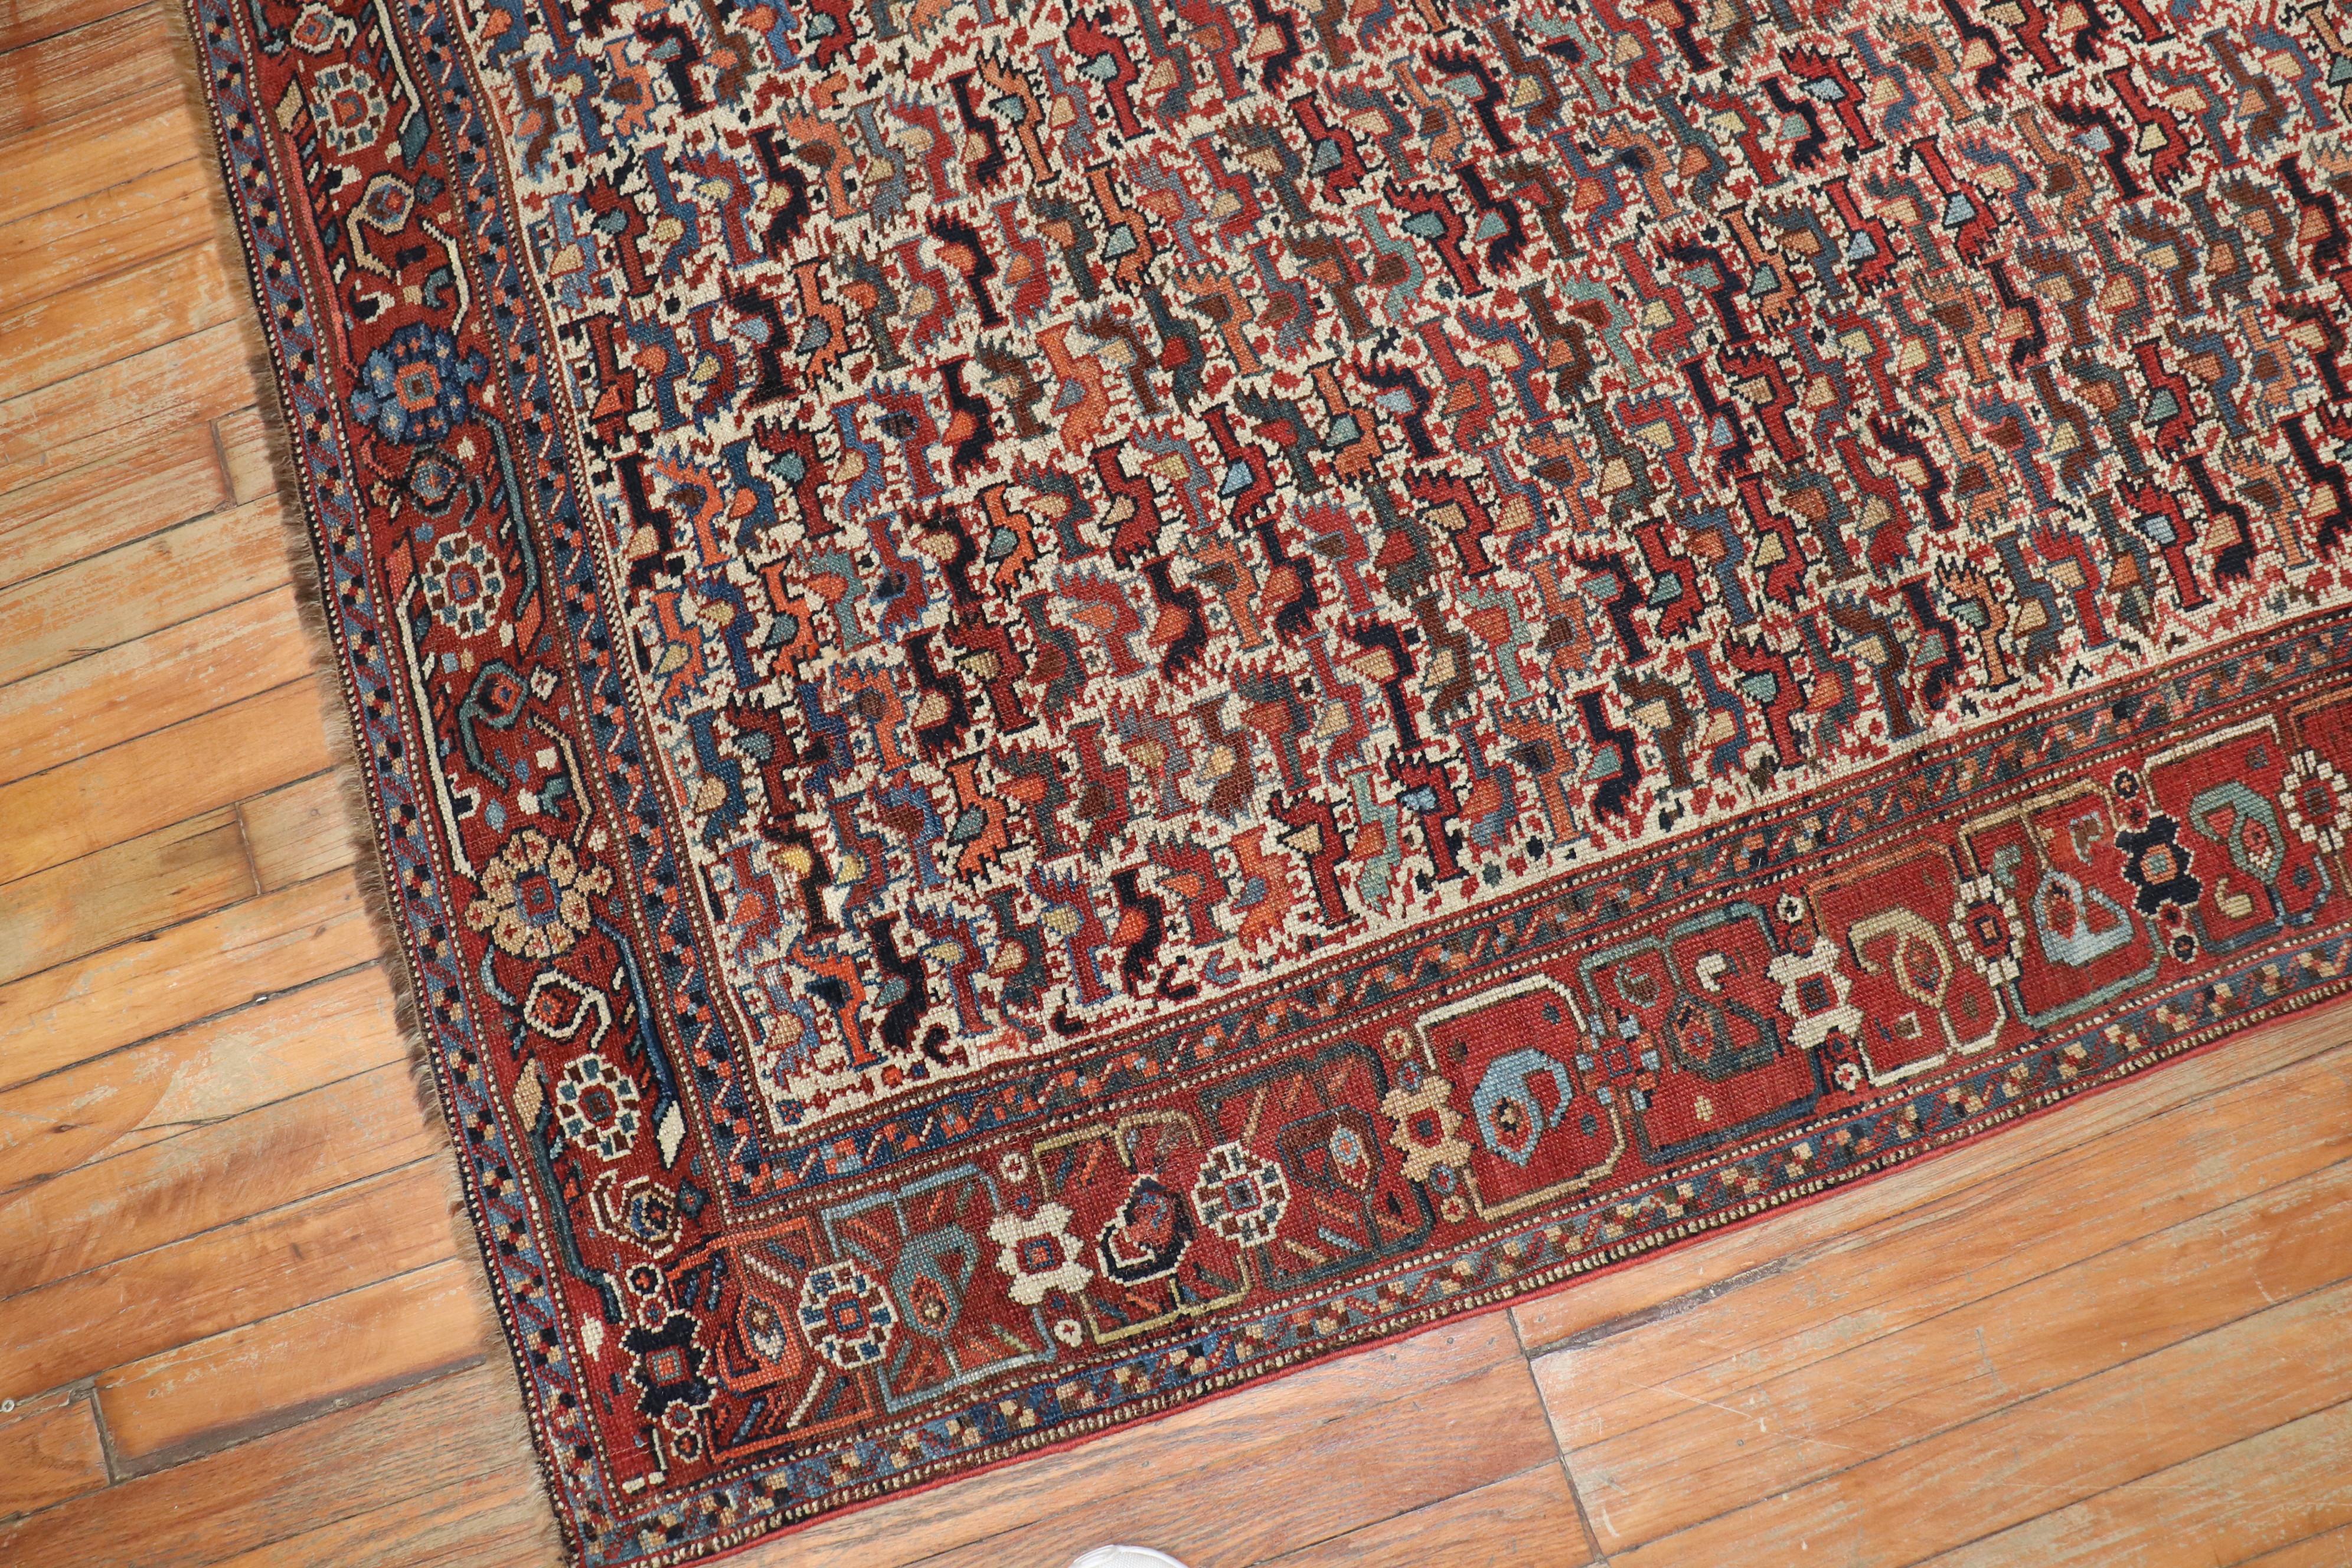 Hand-Woven Tribal Chicken Motif Rustic Persian Afshar Accent Rug, Early 20th Century For Sale